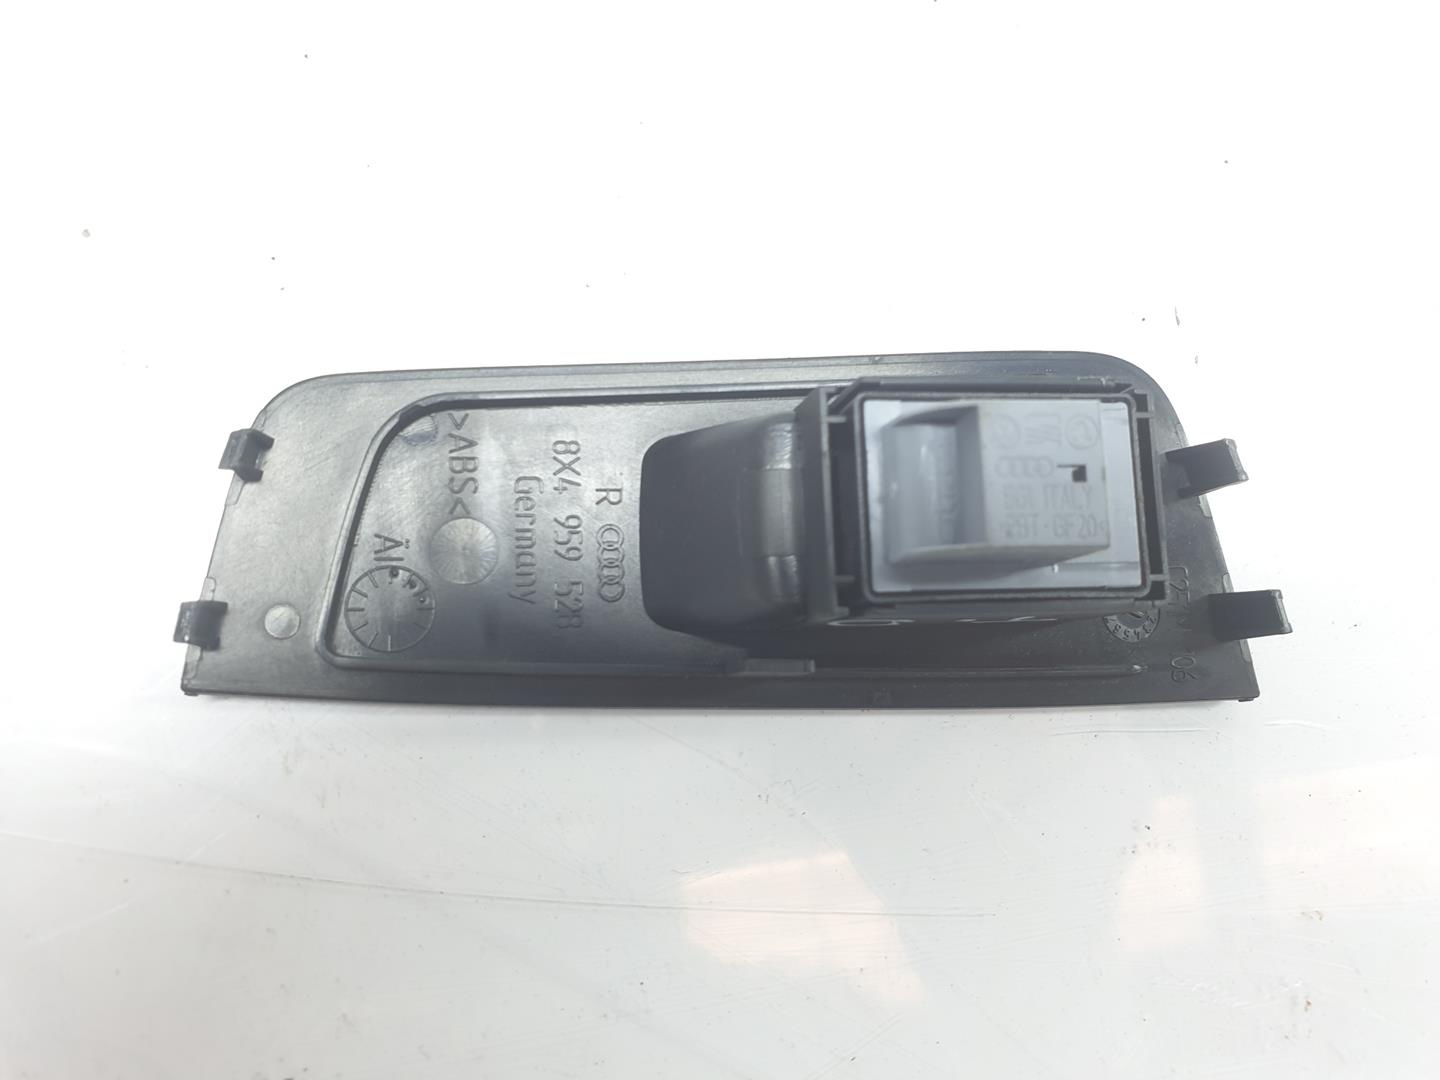 AUDI A7 C7/4G (2010-2020) Rear Right Door Window Control Switch 4H0959855A, 4H0959855A 19820605